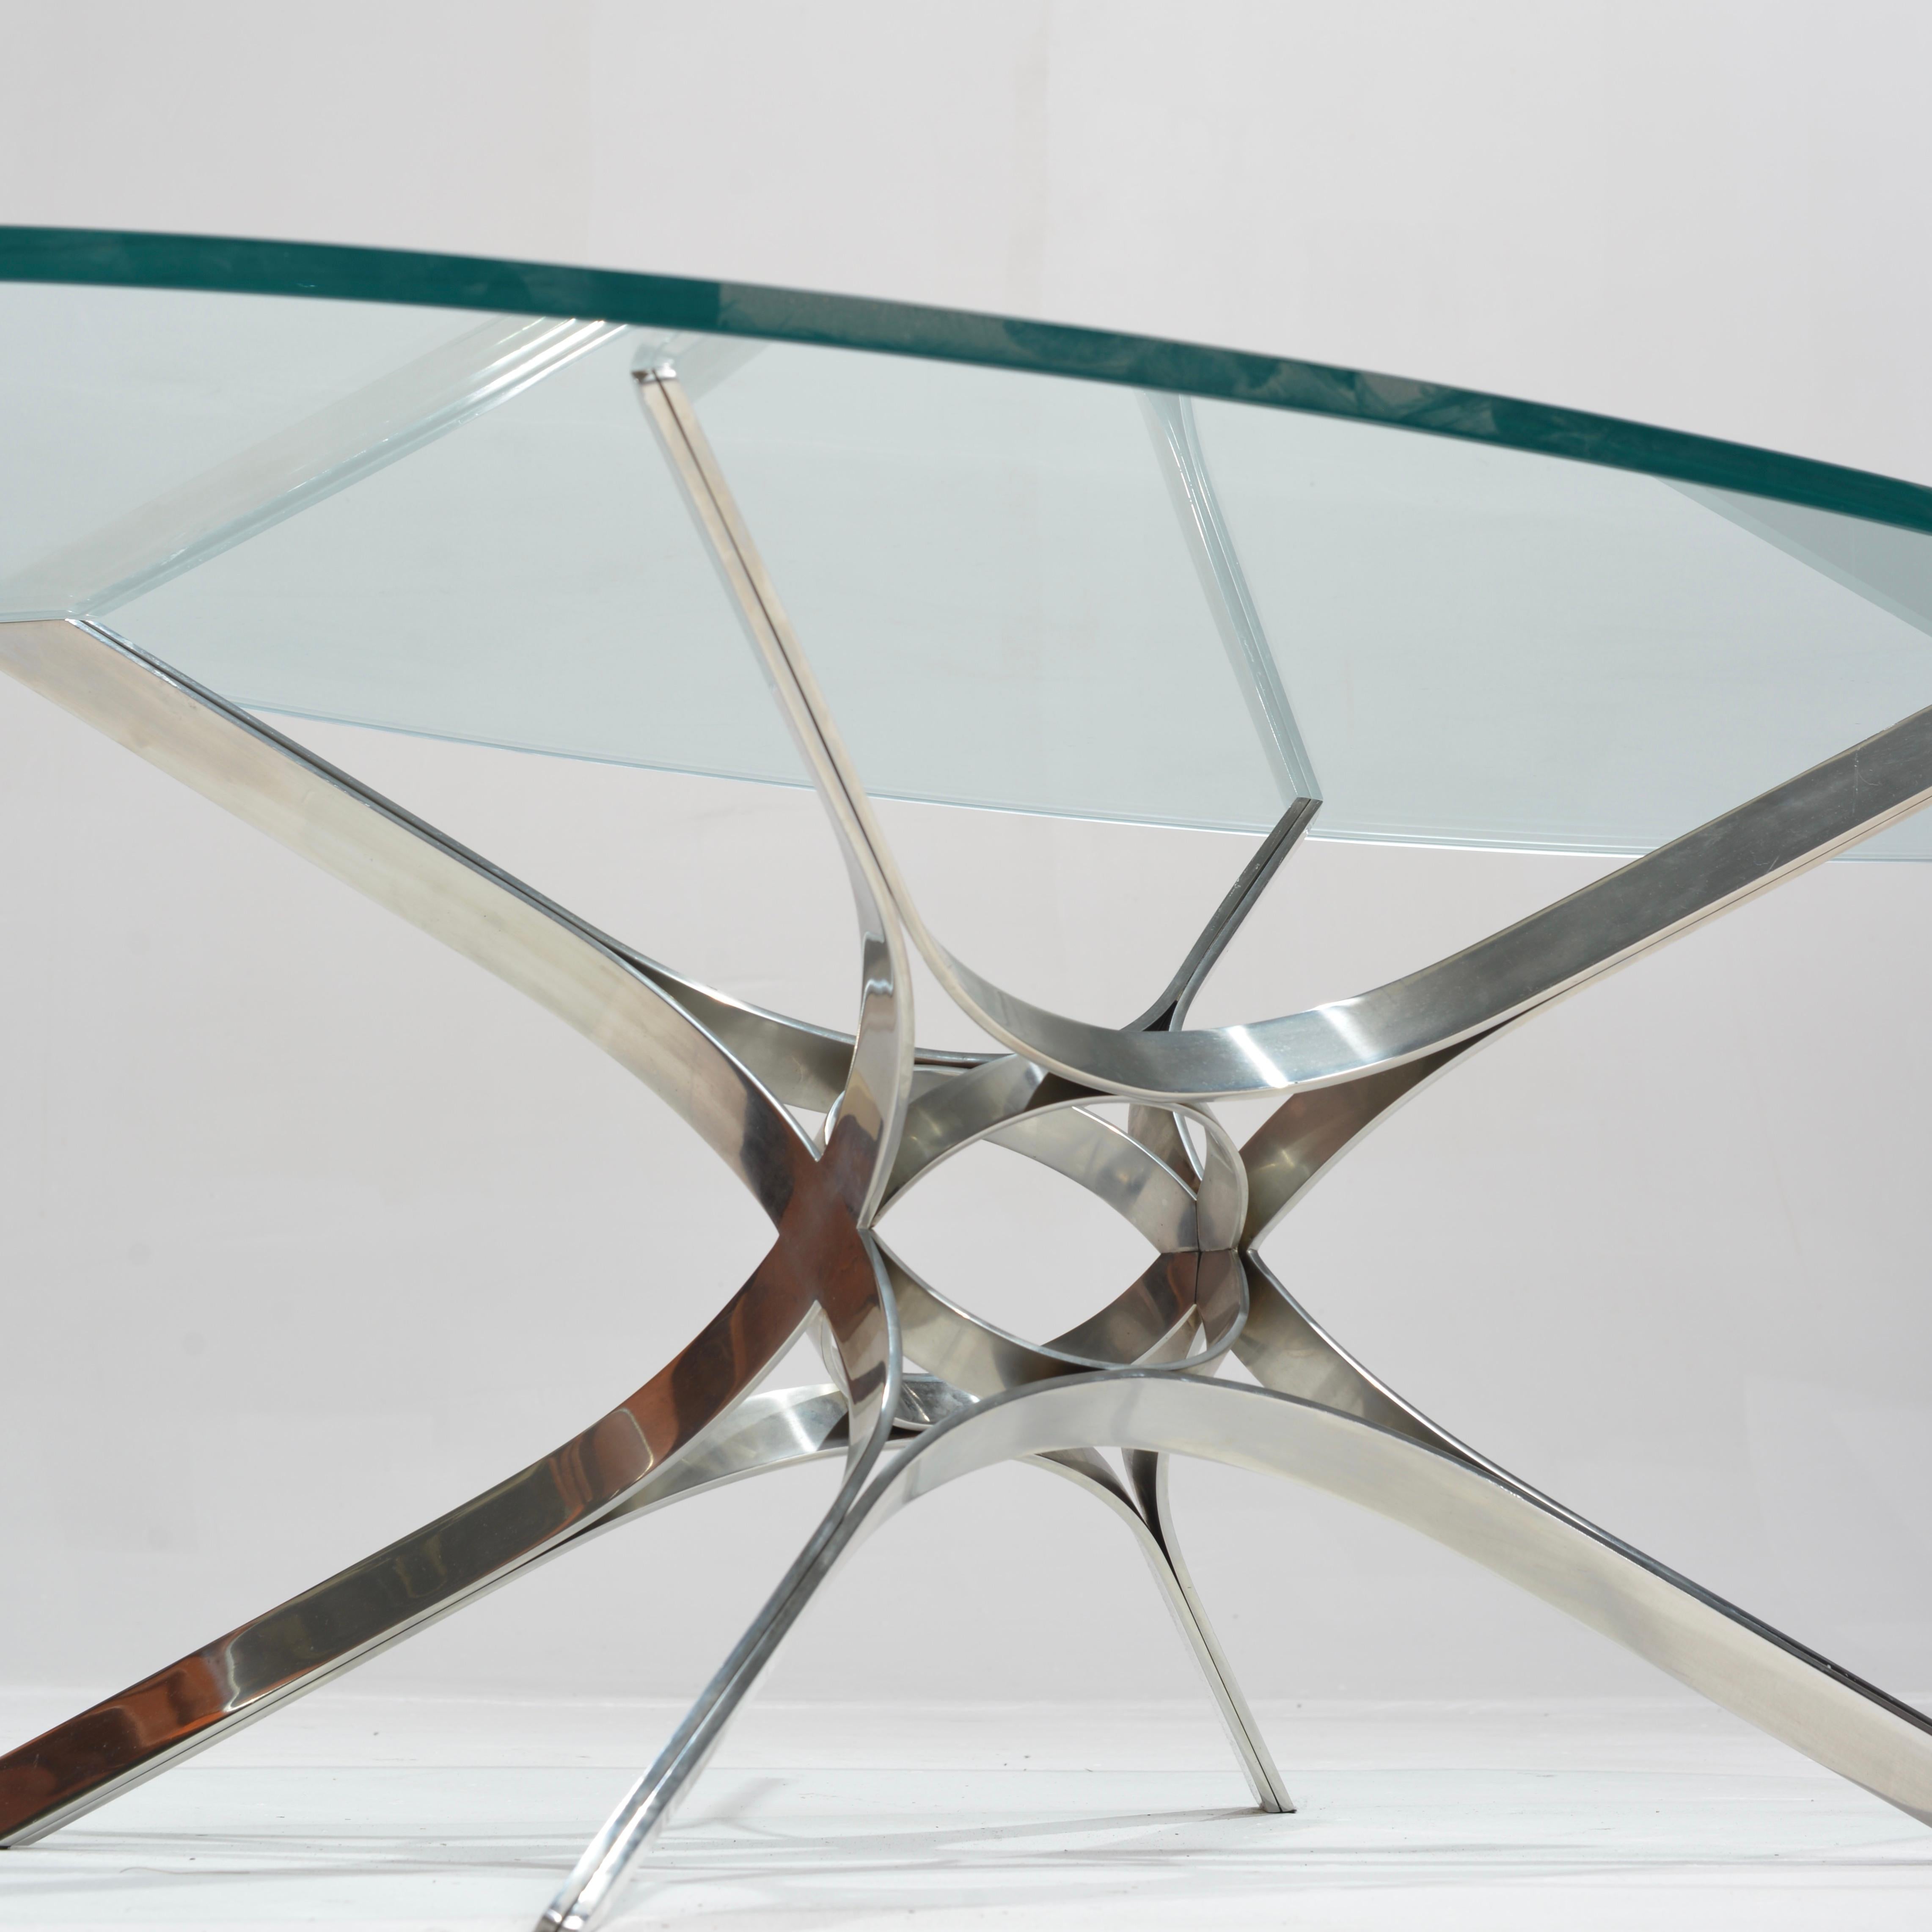 American Sculptural Stainless Steel and Glass Coffee Table by Roger Sprunger for Dunbar For Sale